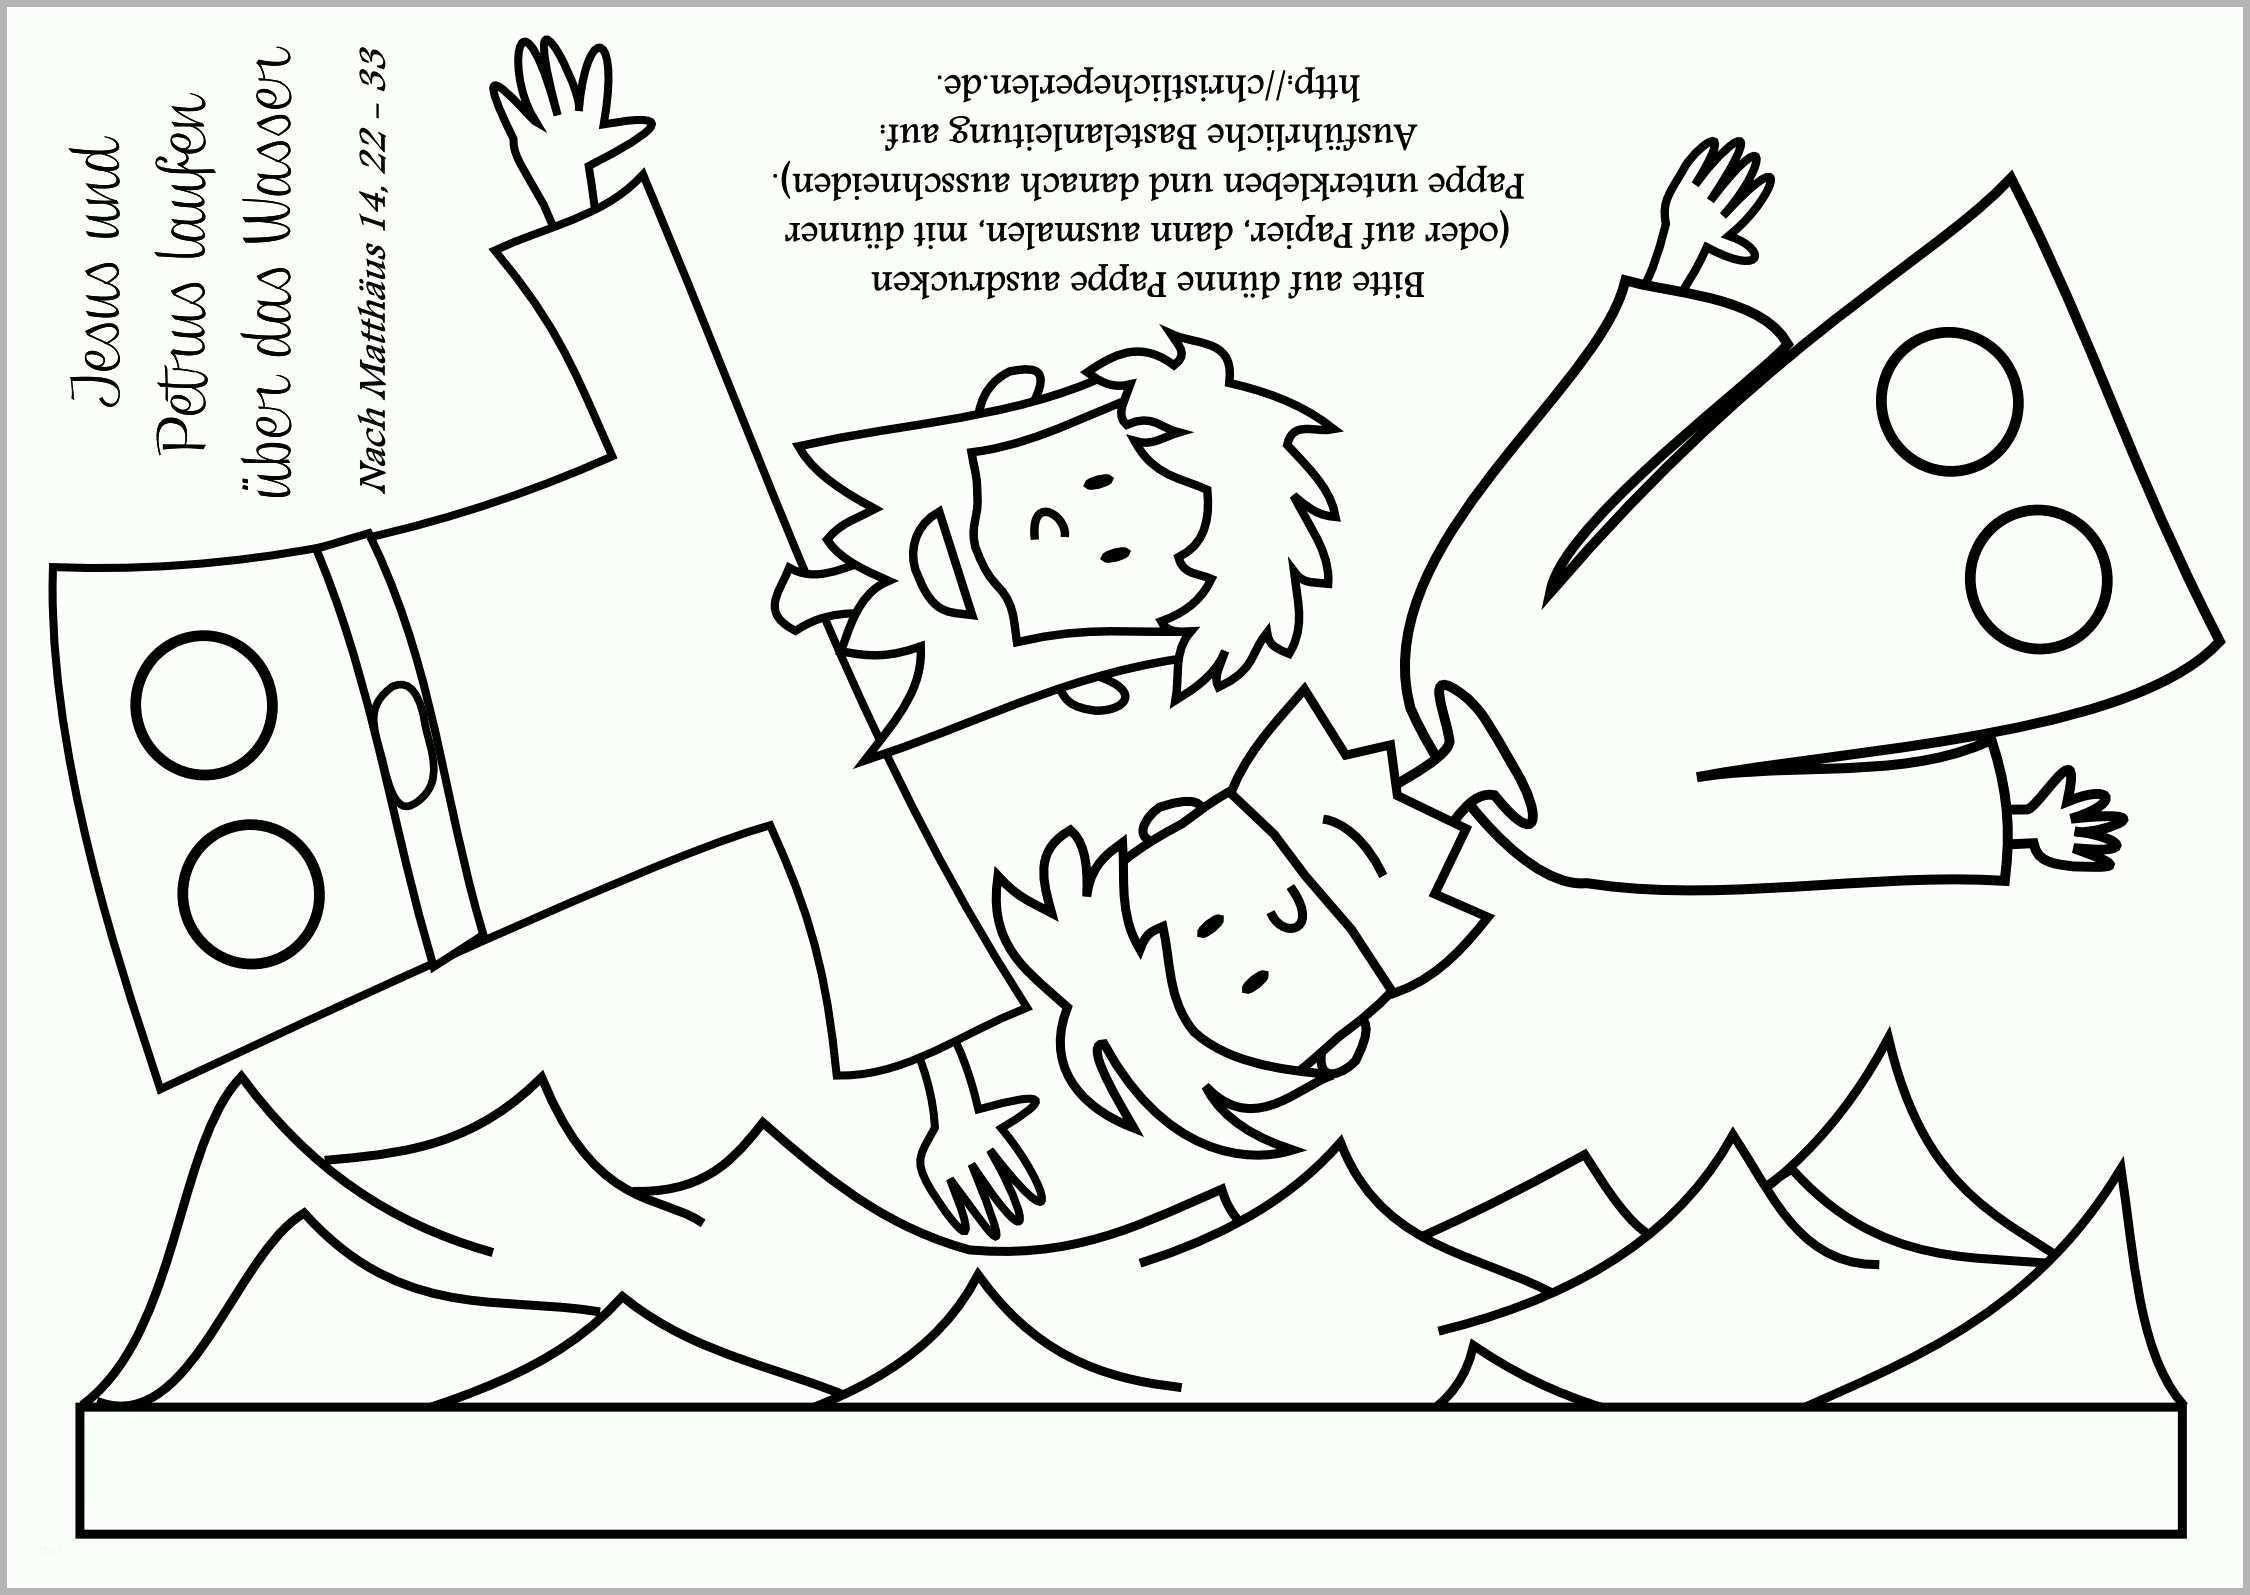 Sensationell Jona Im Wal Ausmalbilder Jonah In the Whale Coloring Pages